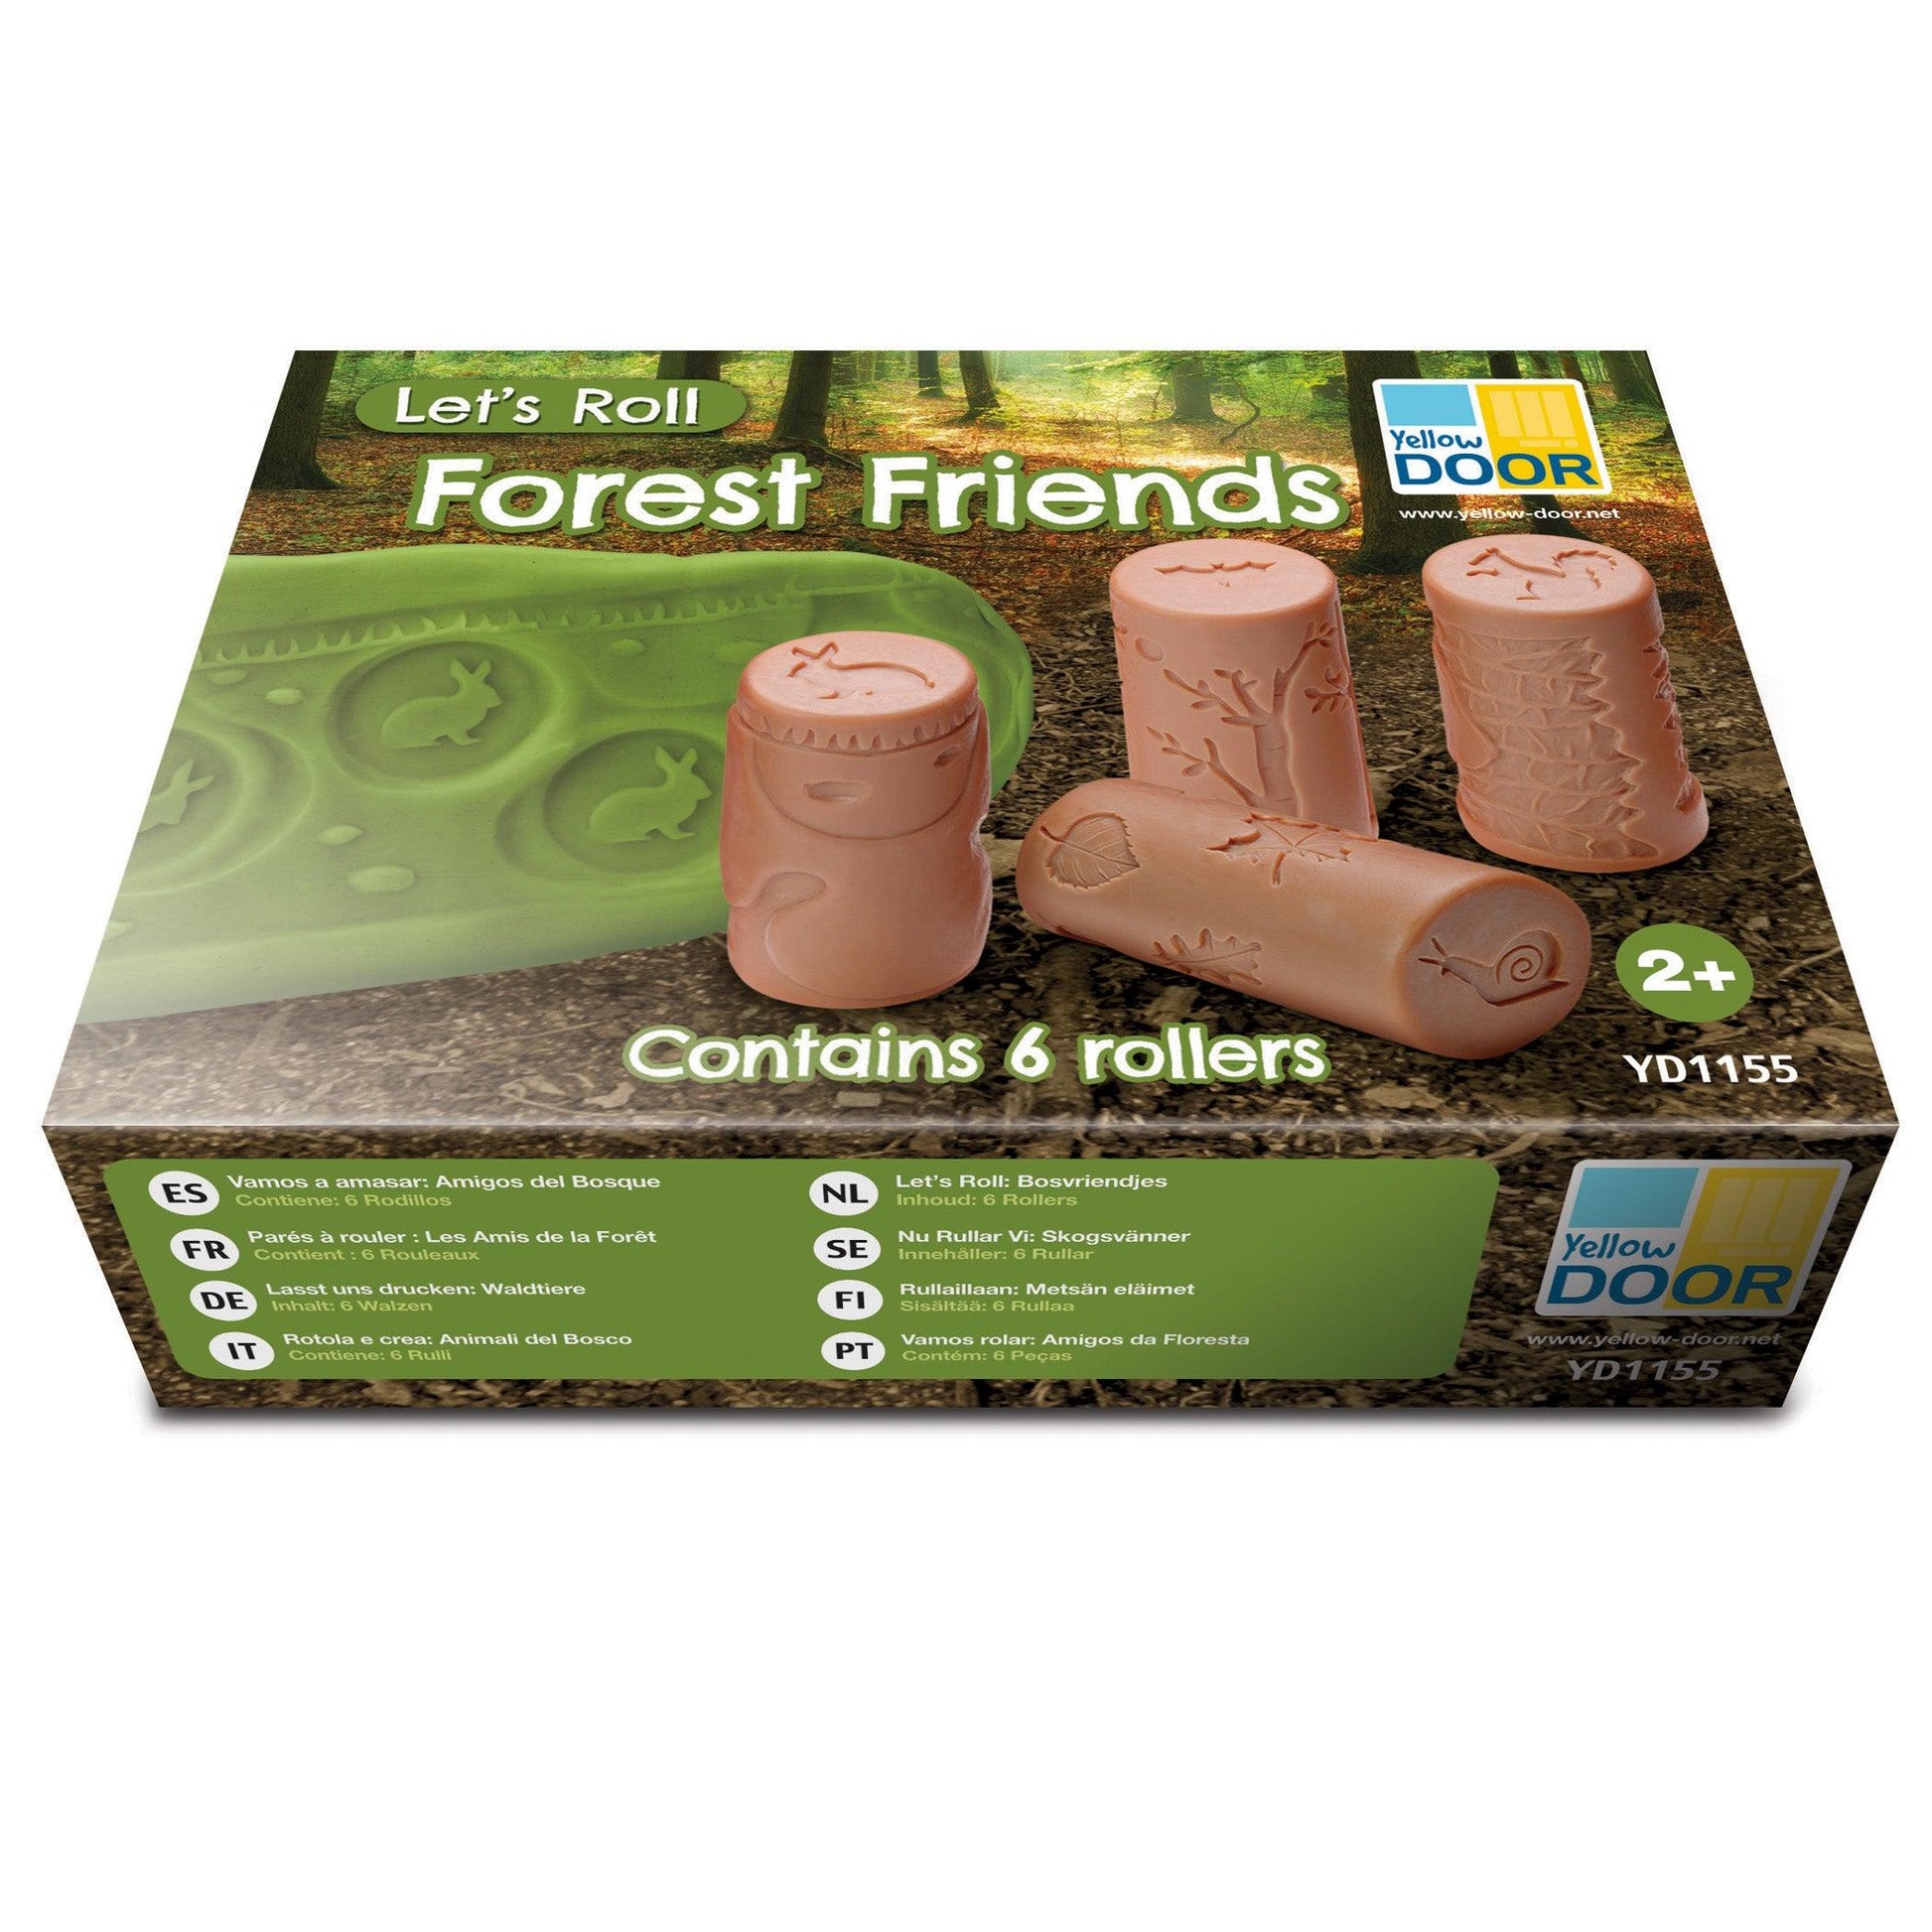 Let's Roll, Forest Friends Rollers, Set of 6 - Loomini